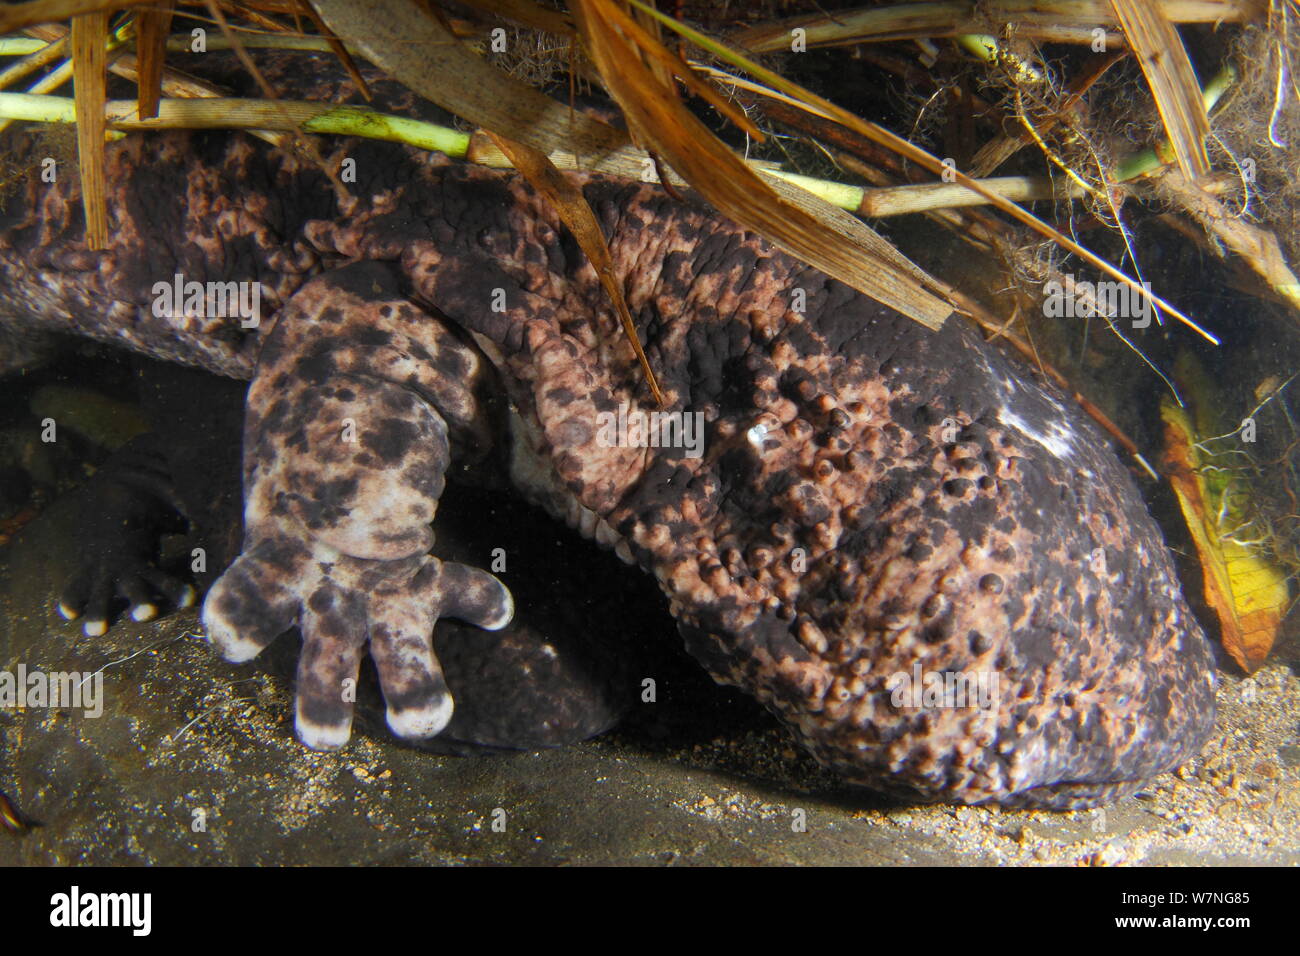 Two Japanese giant salamanders (Andrias japonicus) in river, Japan, August Stock Photo